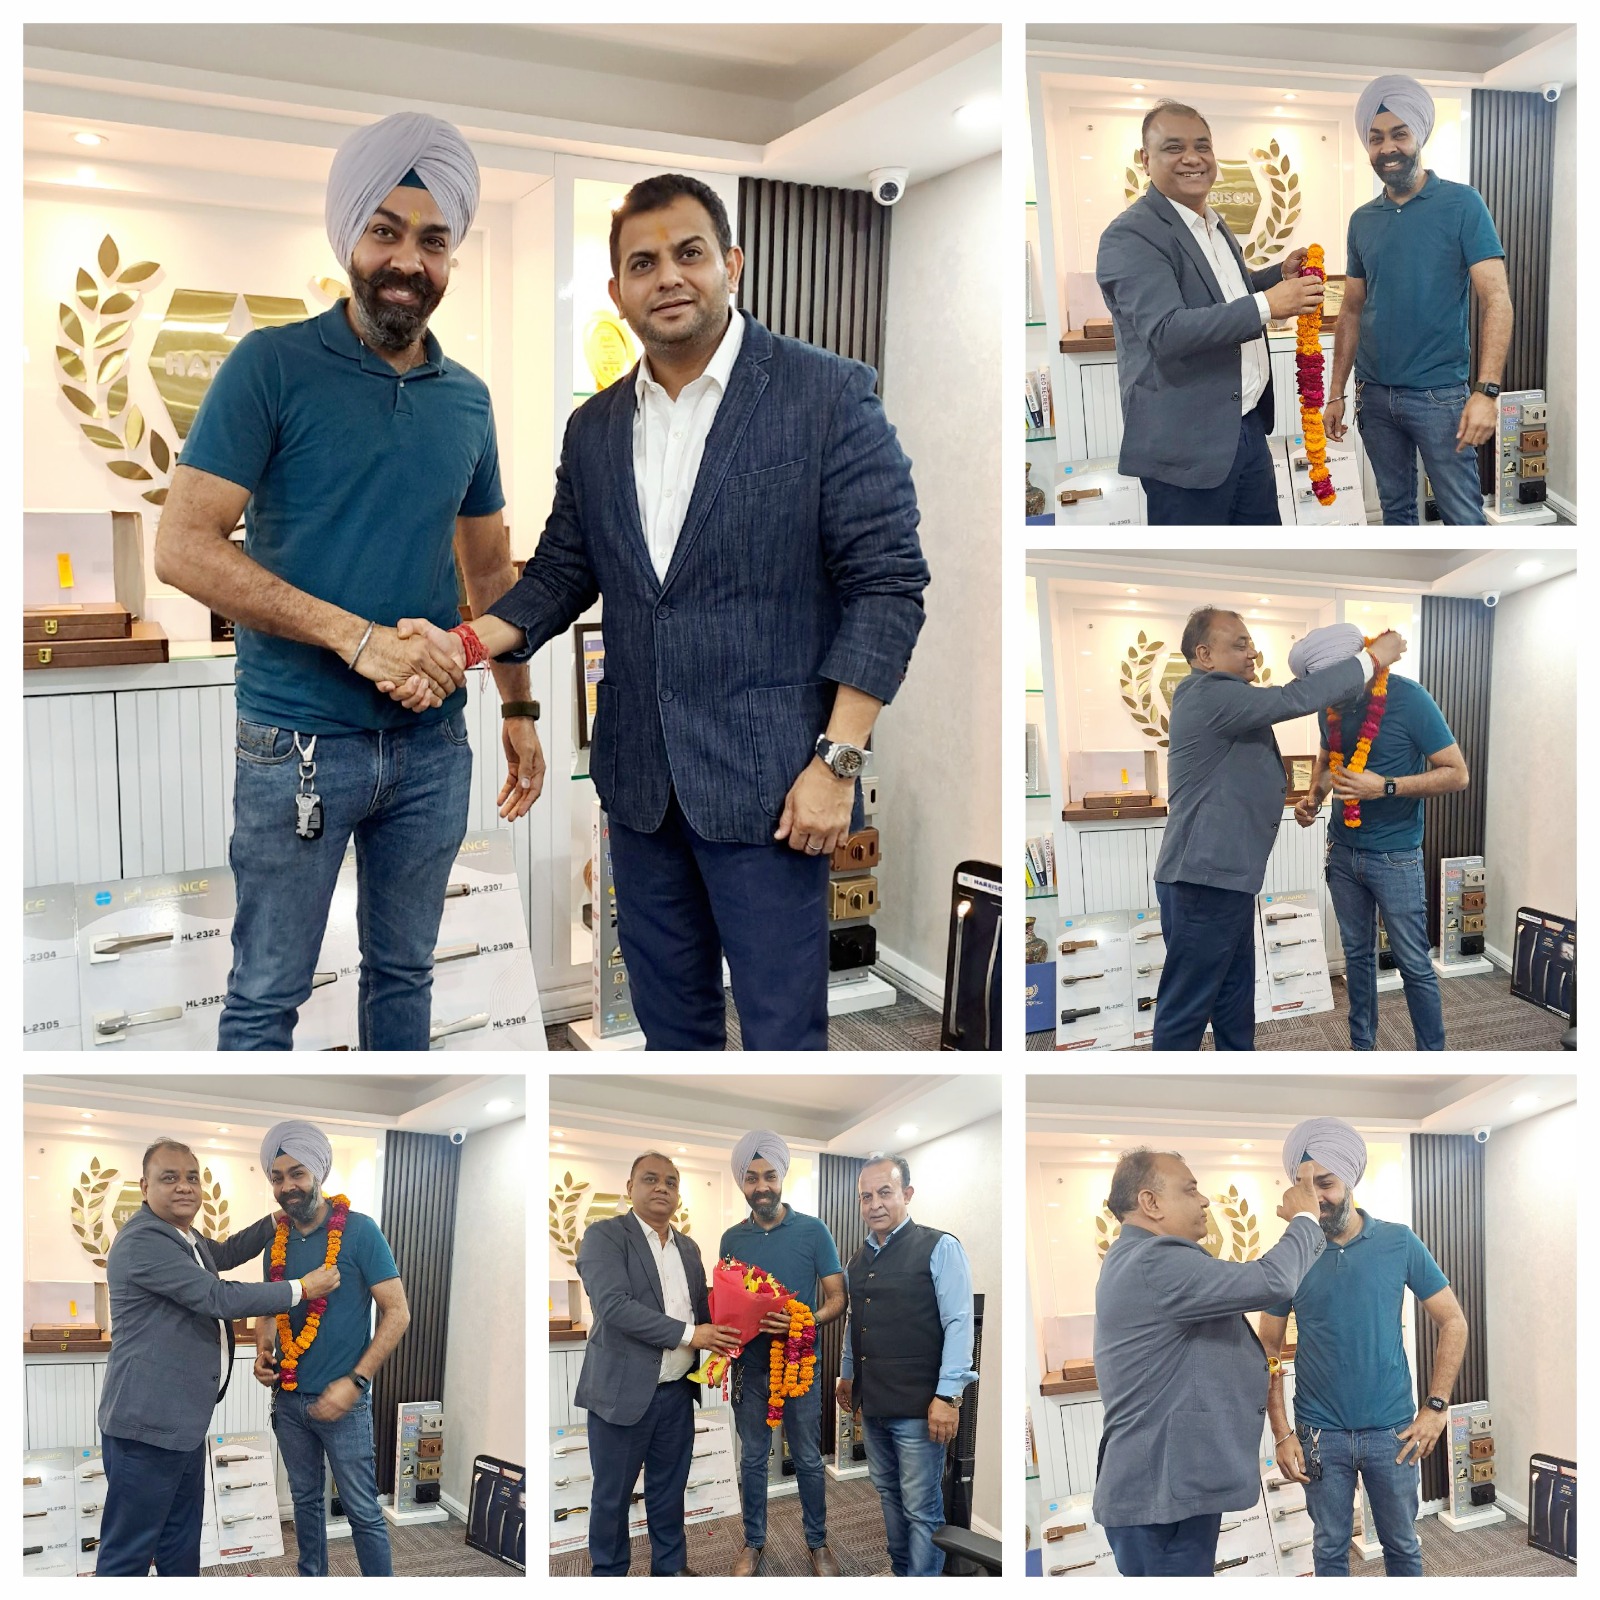 Manthan Meet & Greet Held At Punjabi Bagh Office On 13th March’ 2023- Feedback For Growth & Progress